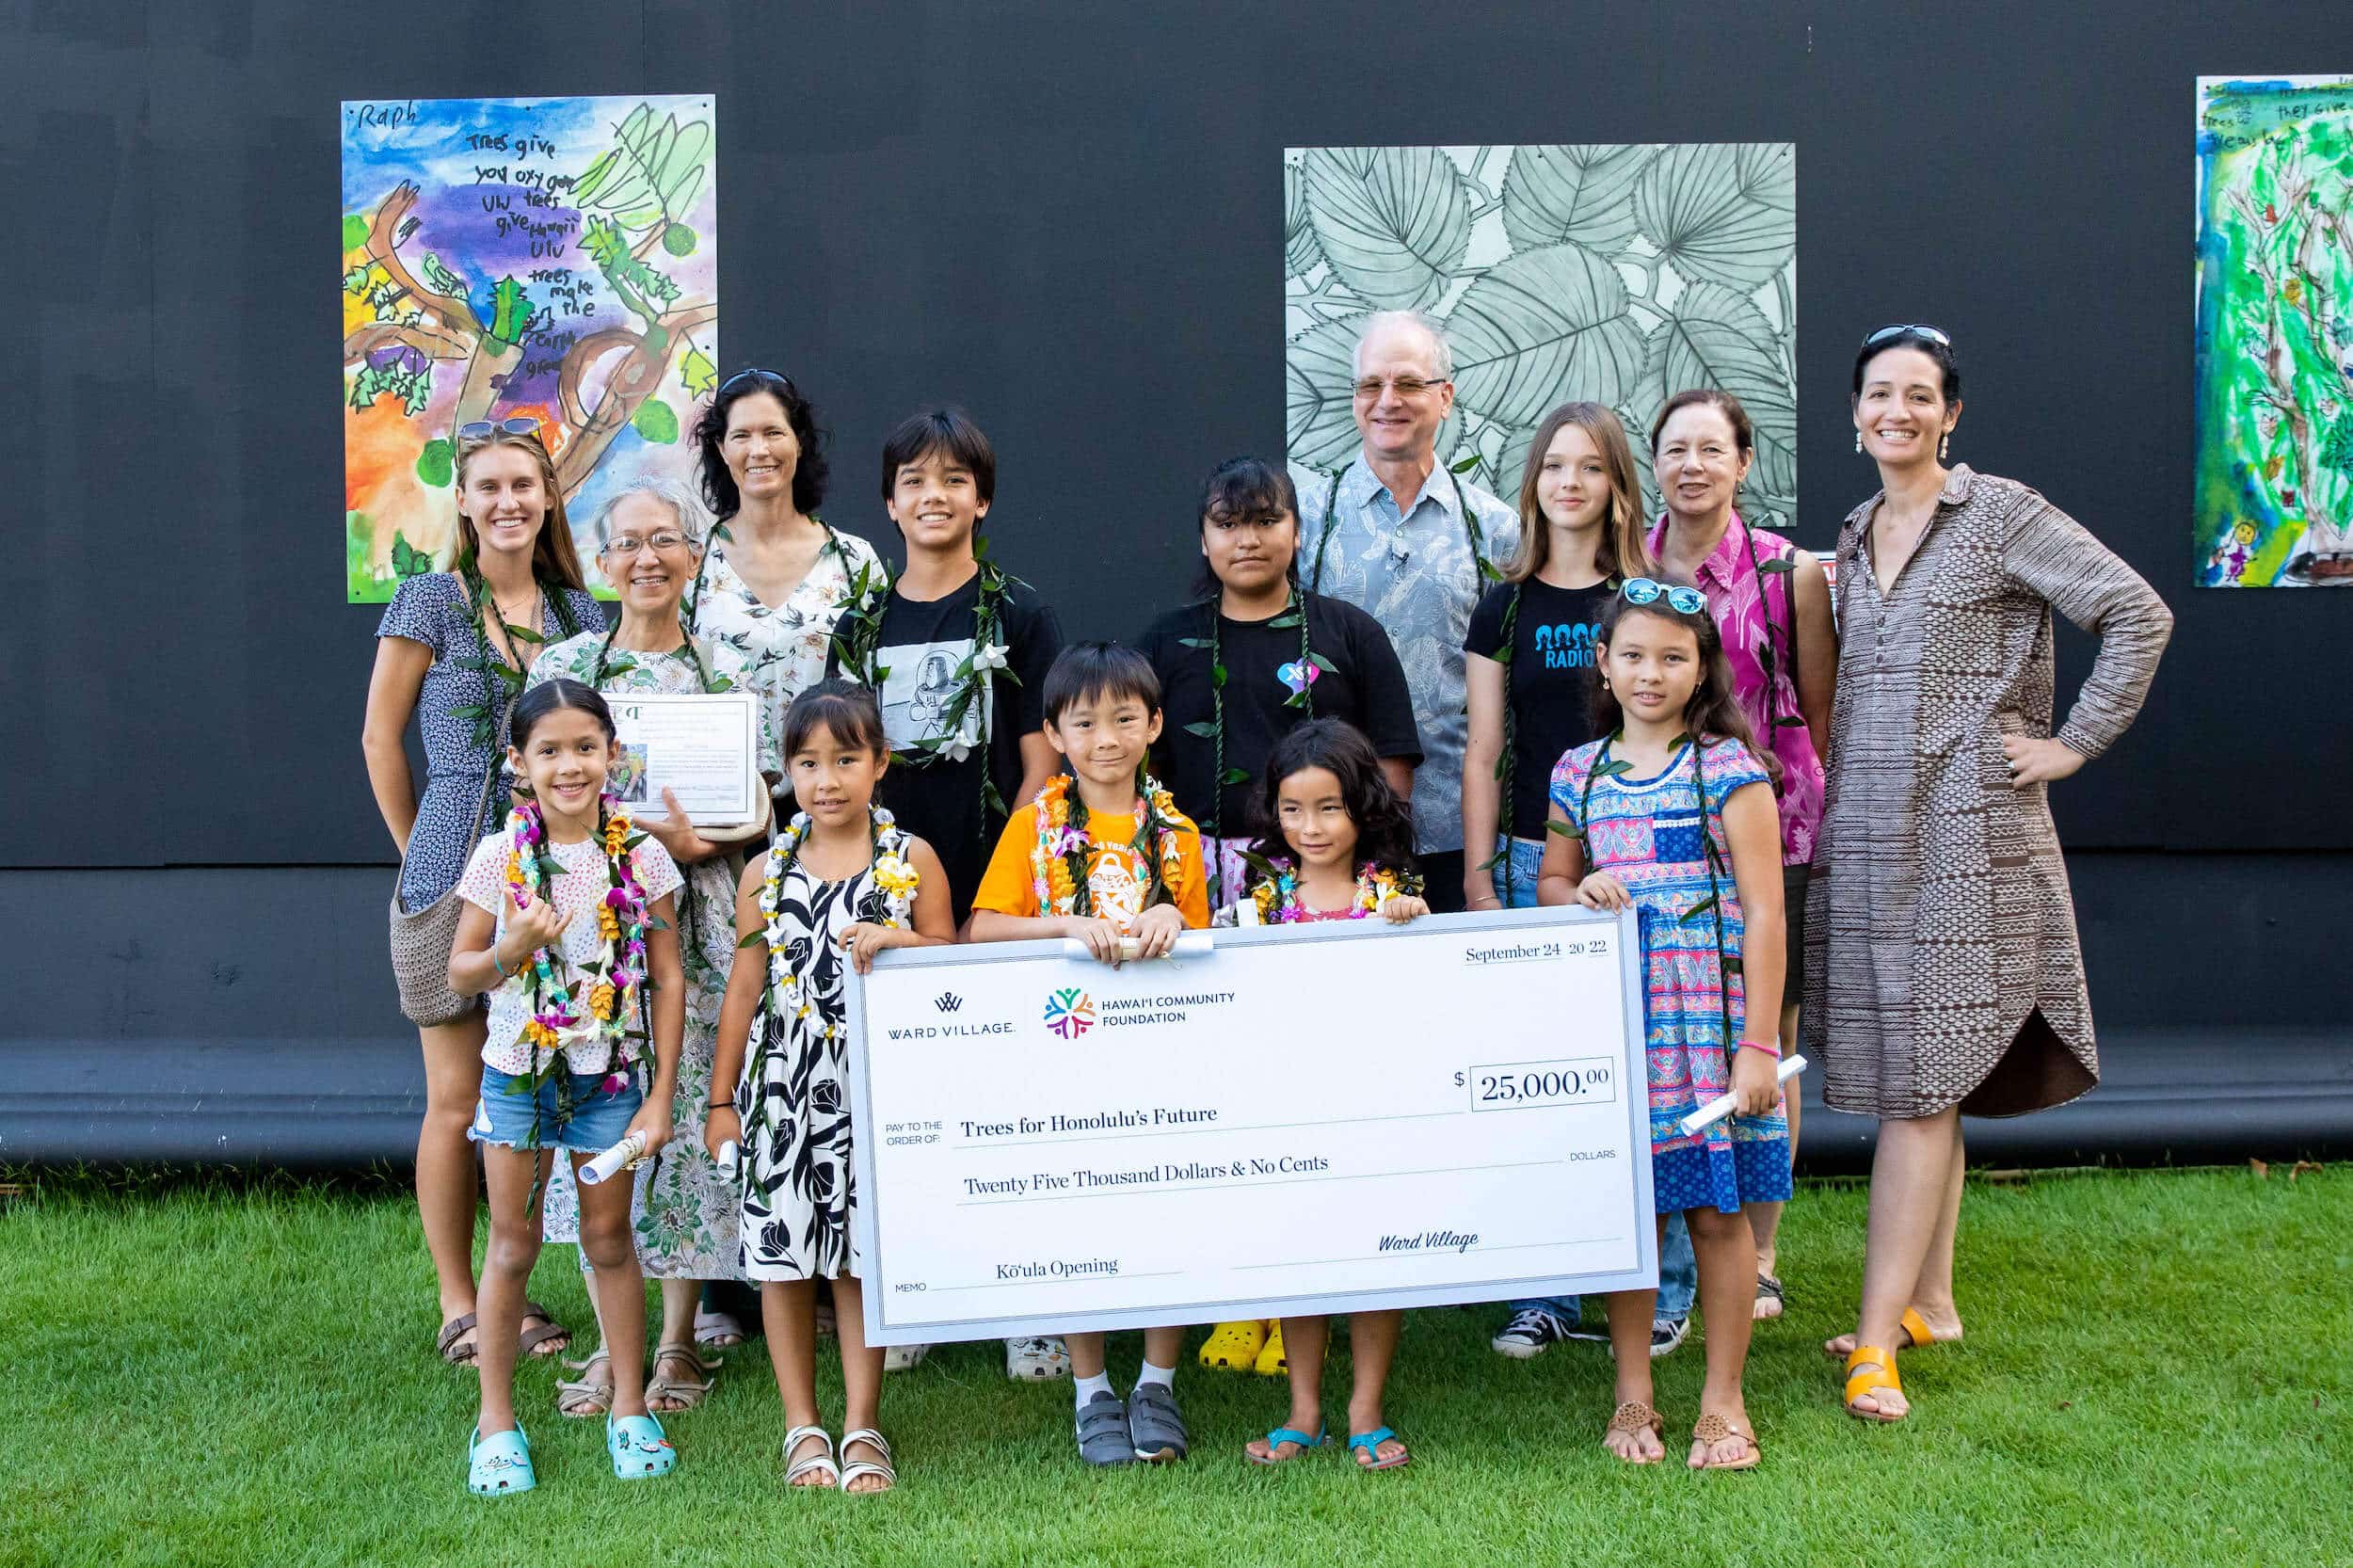 Group of children and adults posing with a check donation for Trees for Honolulu's Future.